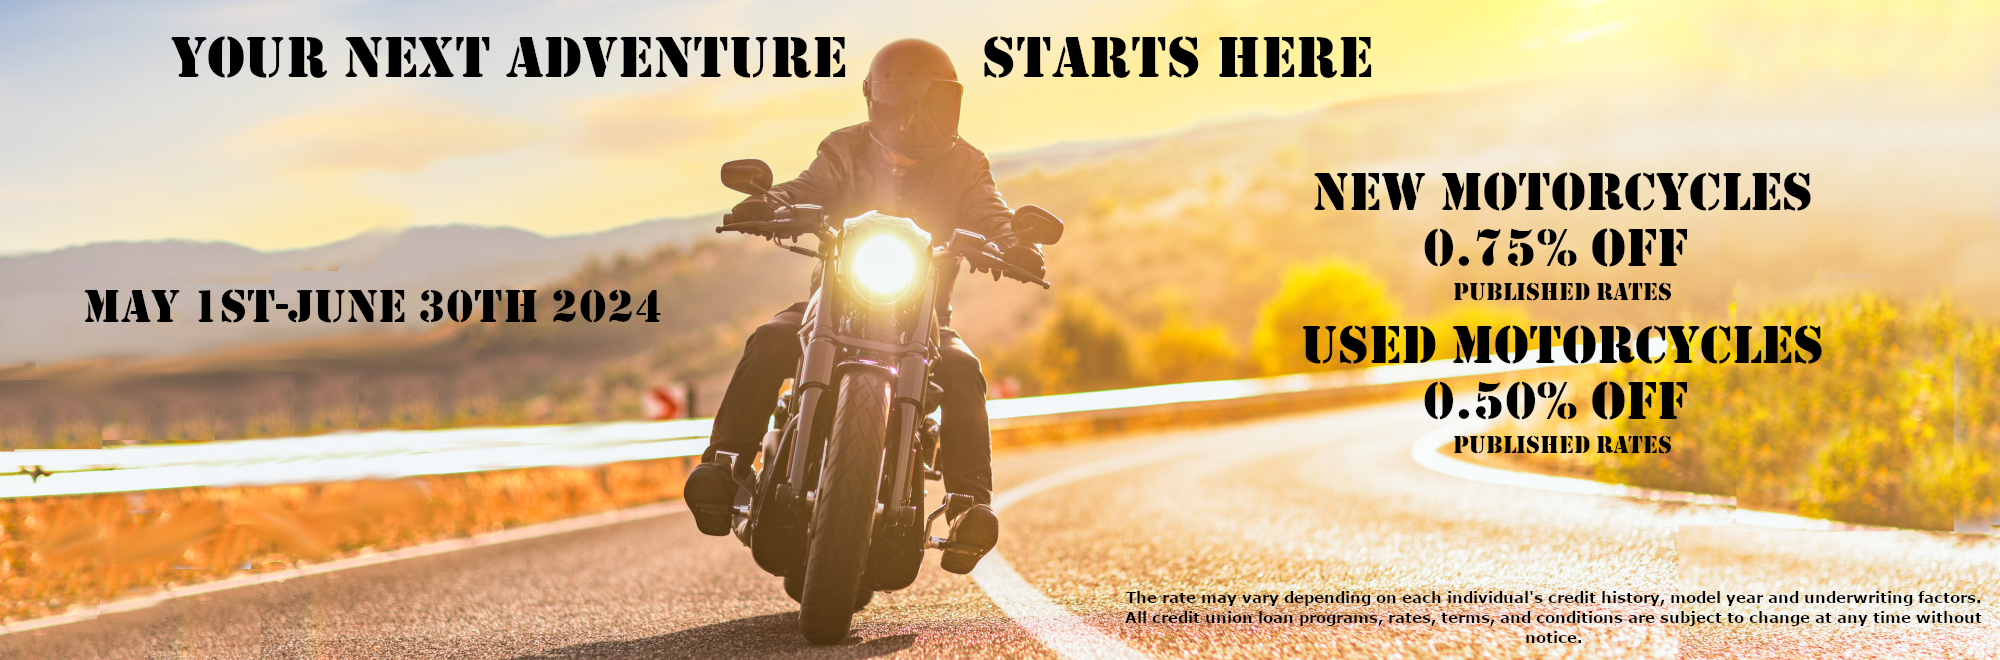 May 1st-june 30th 2024
Your next adventure starts here
New 
motorcycles

0.75% off 
published rates

used 
motorcycles

0.50% off 
published rates
The rate may vary depending on each individual's credit history, model year and underwriting factors. All credit union loan programs, rates, terms, and conditions are subject to change at any time without notice.
